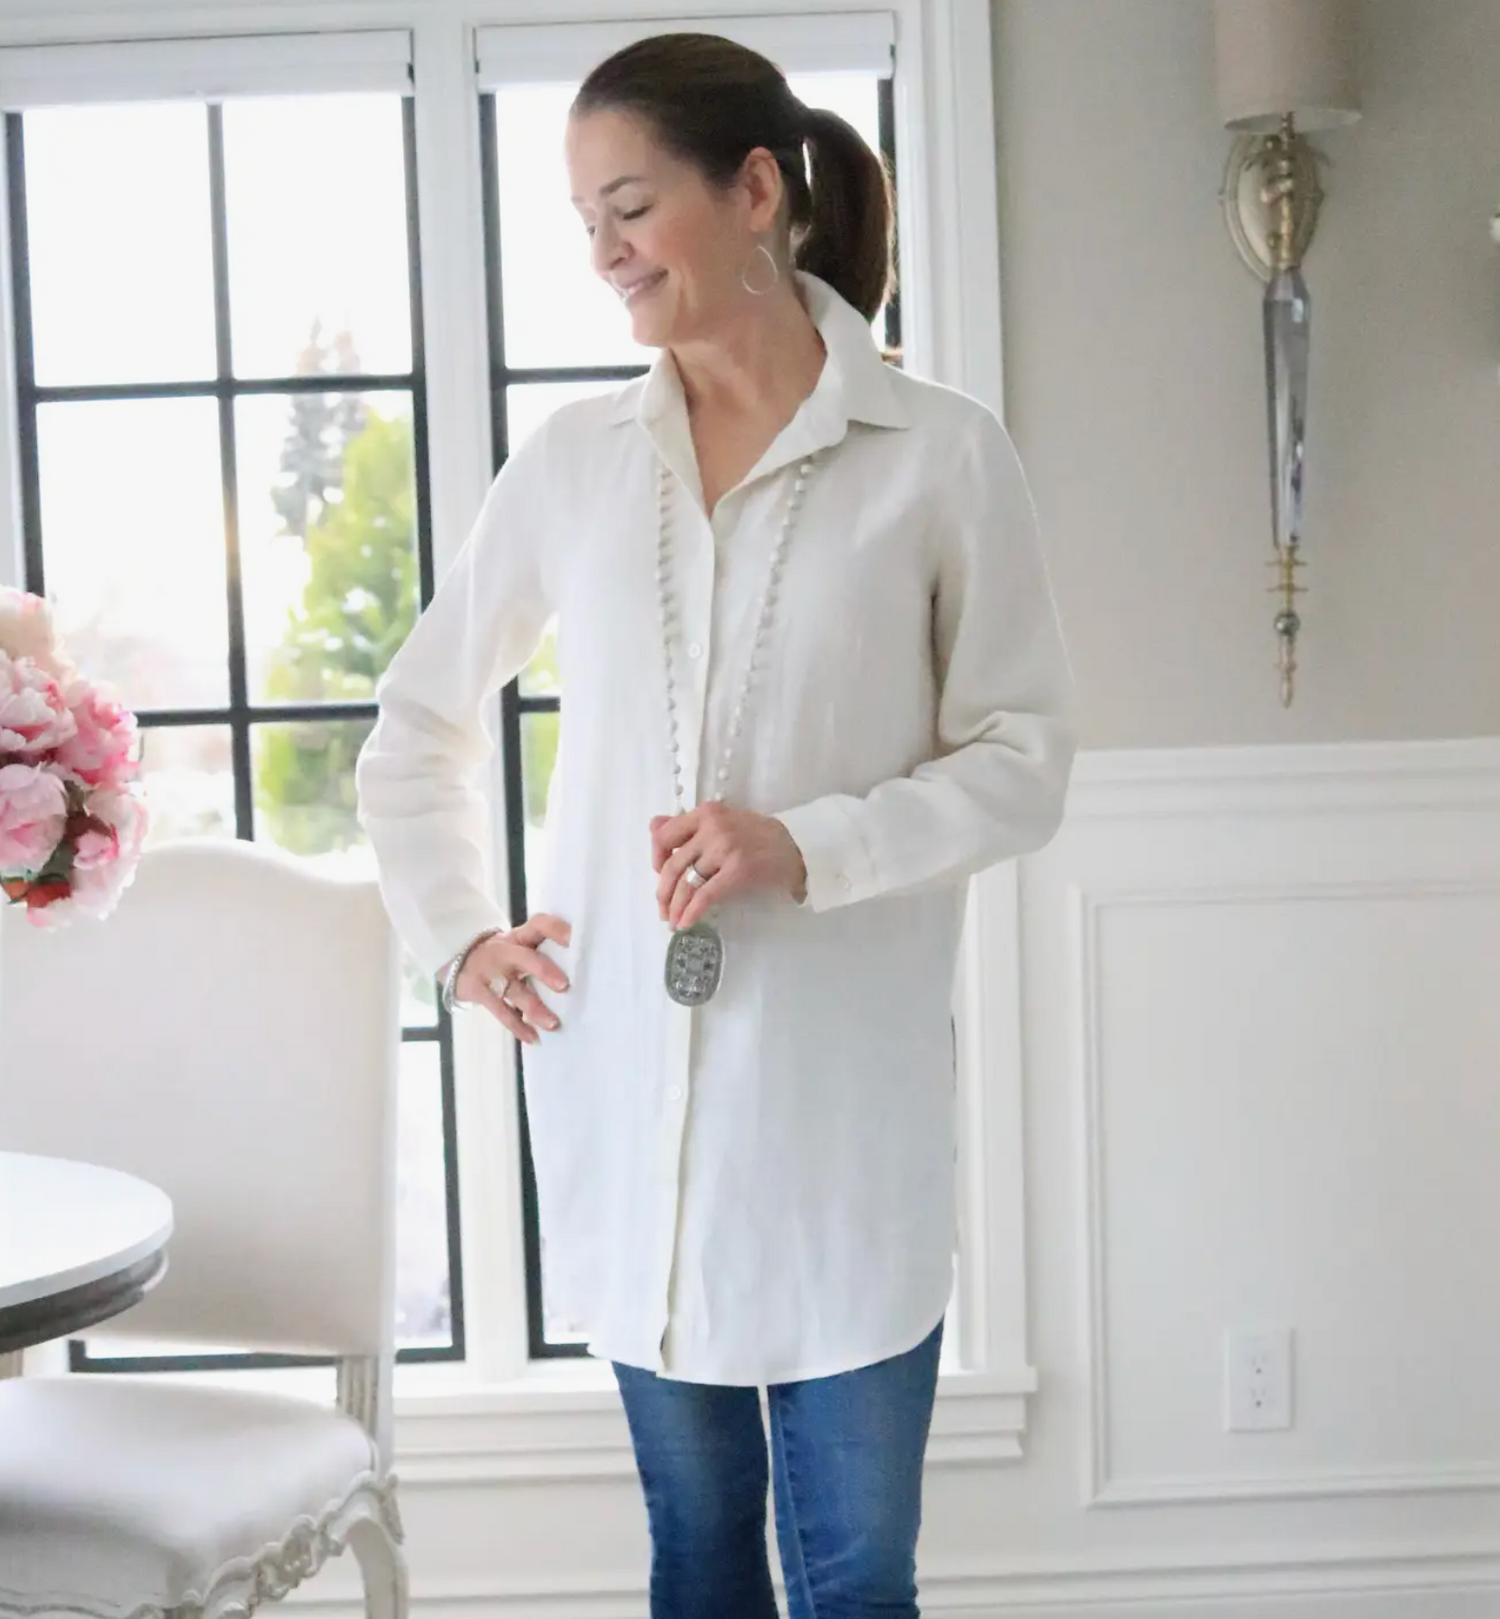 The Christina tunic is 100% European linen button front blouse made longer with slits on the side so it can be worn over leggings, skinny jeans, or as a light jacket. Very comfortable for a casual look or dress it up. Runs true to size.